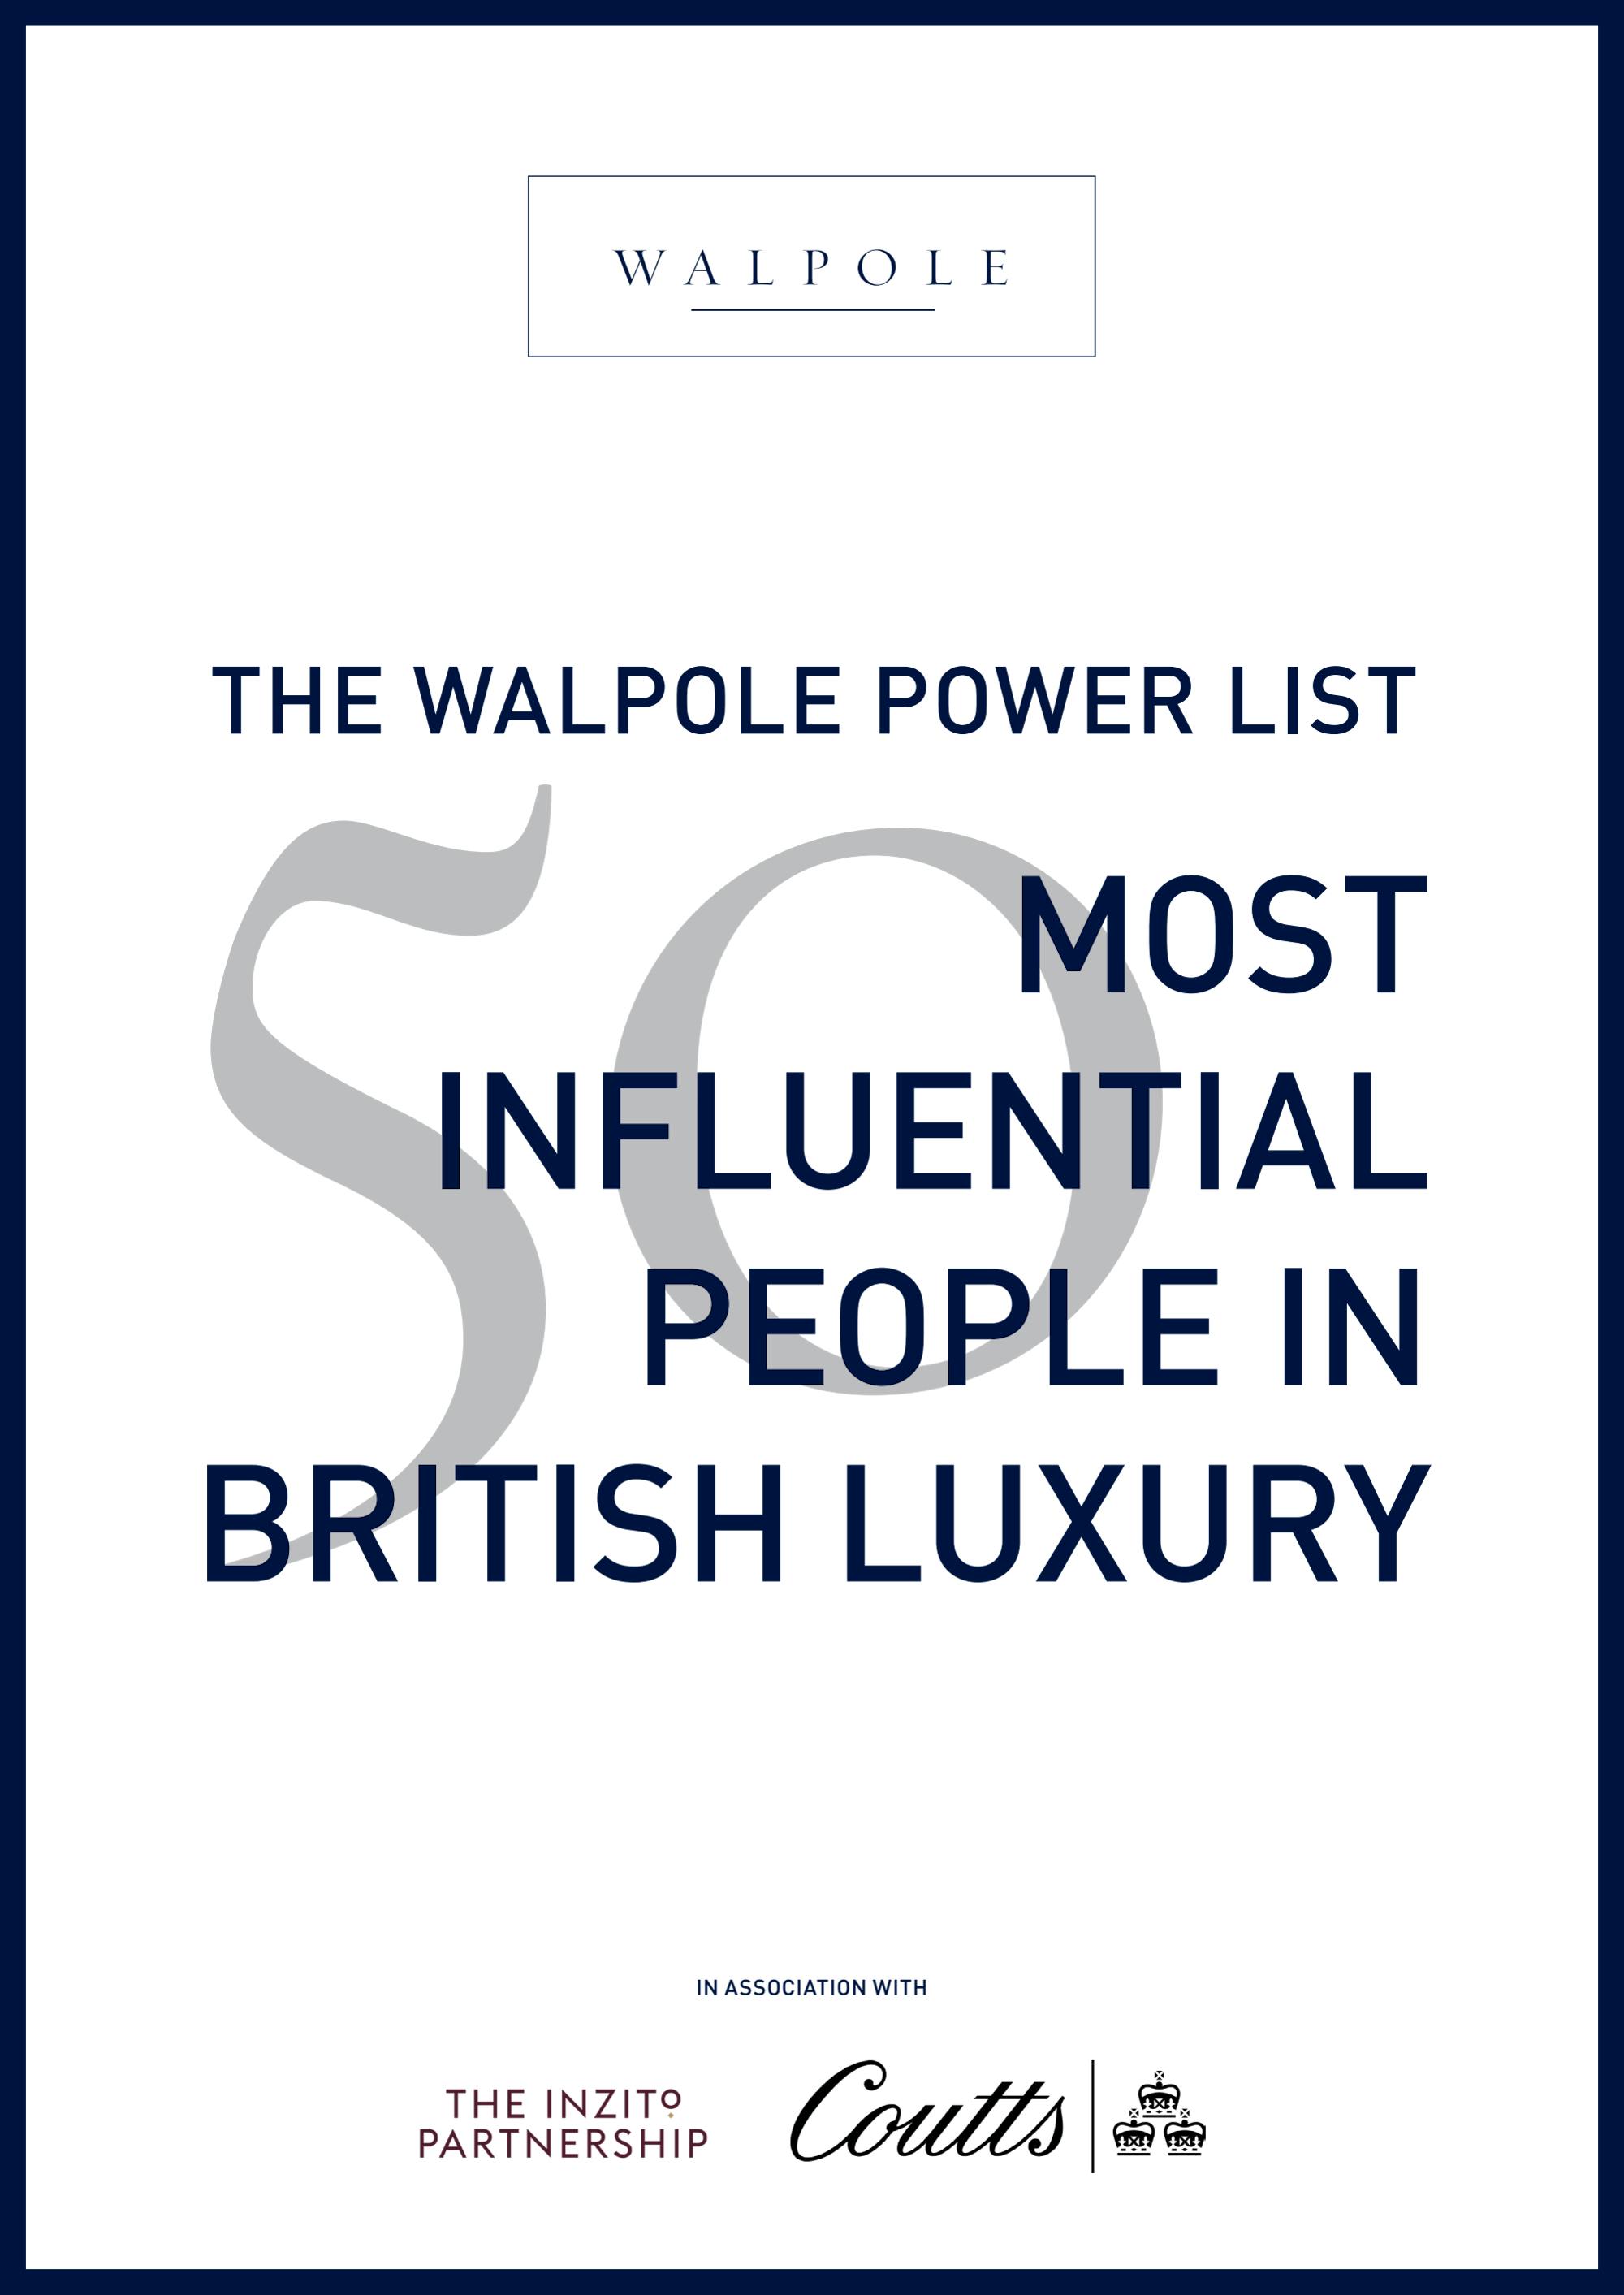 The Walpole Power List 2019  The 50 Most Influential People in British Luxury 